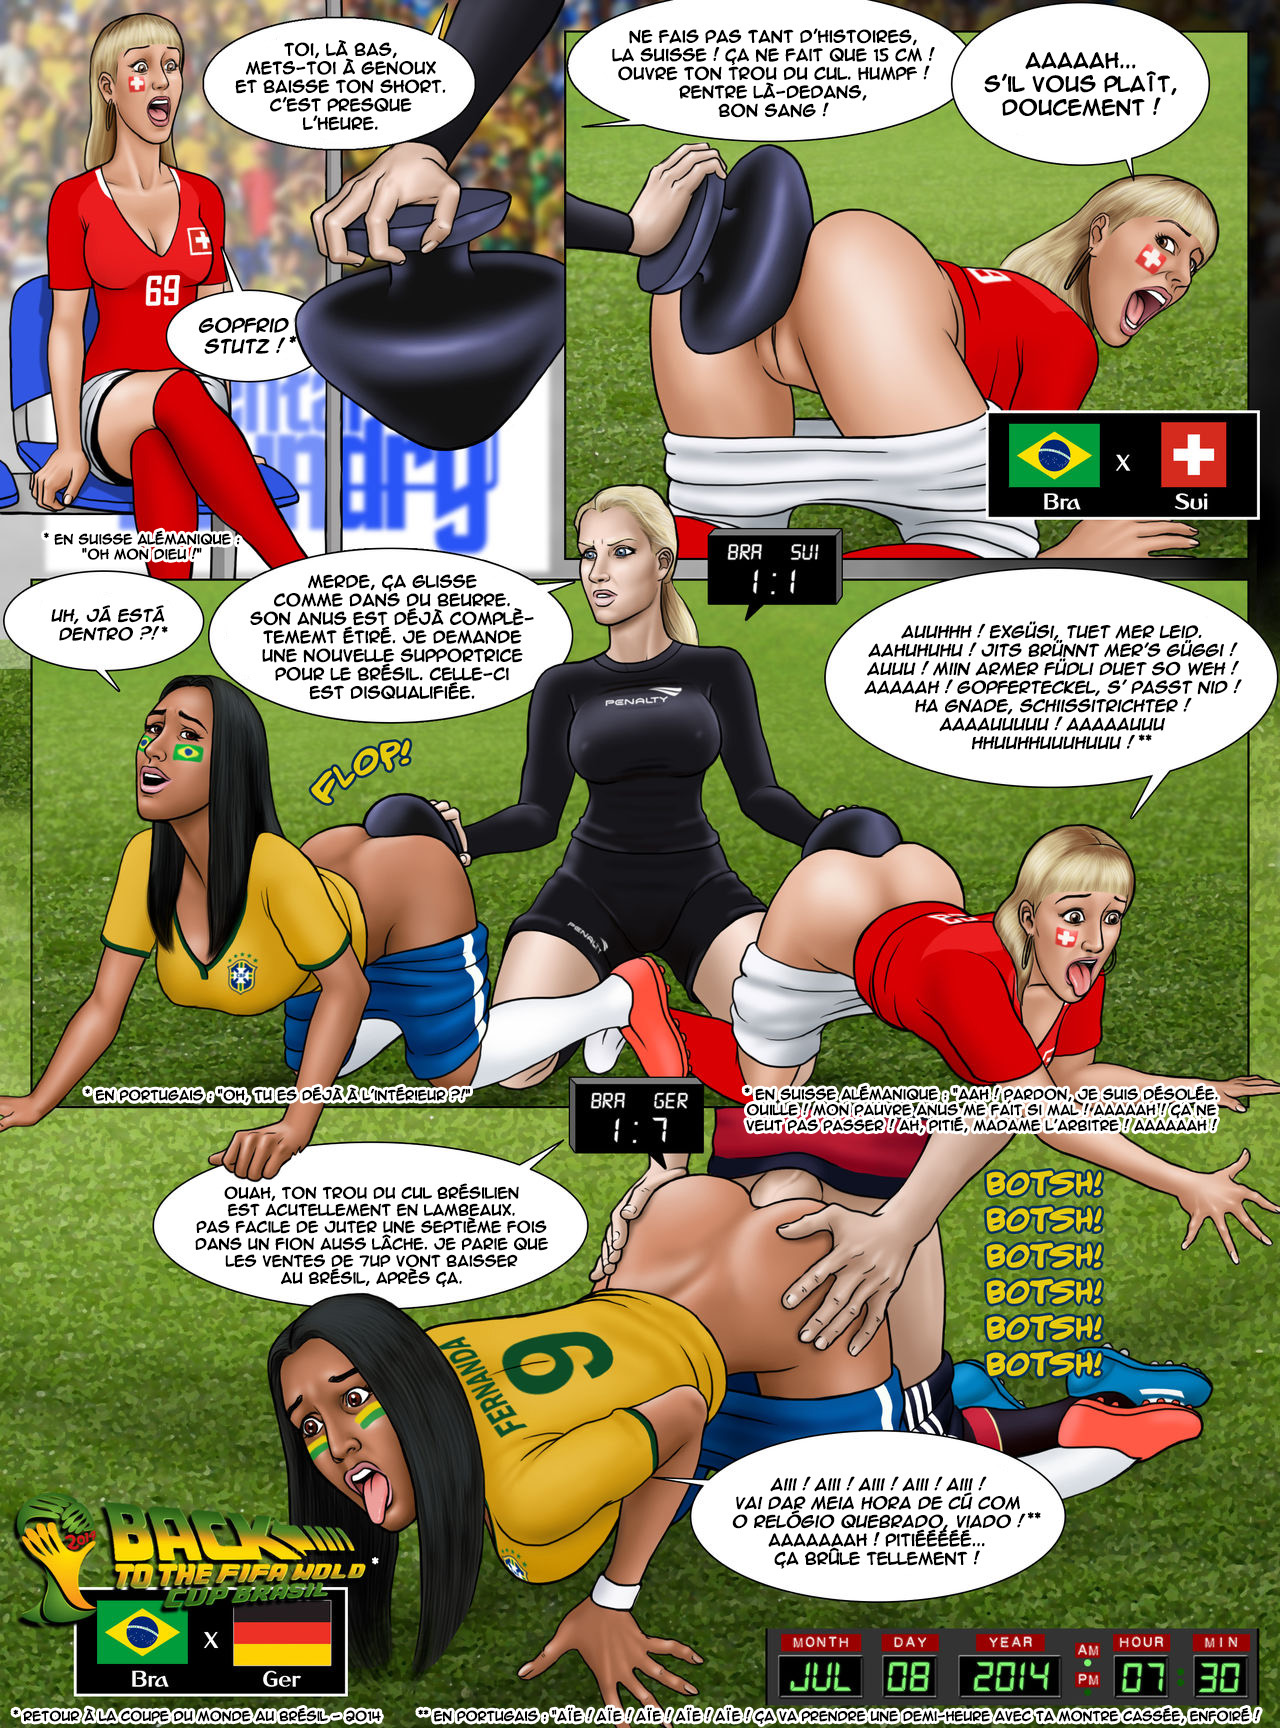 FIFA World Cup Russia 2018 - Soccer Hentai - Womens World Cup France 2019 numero d'image 5